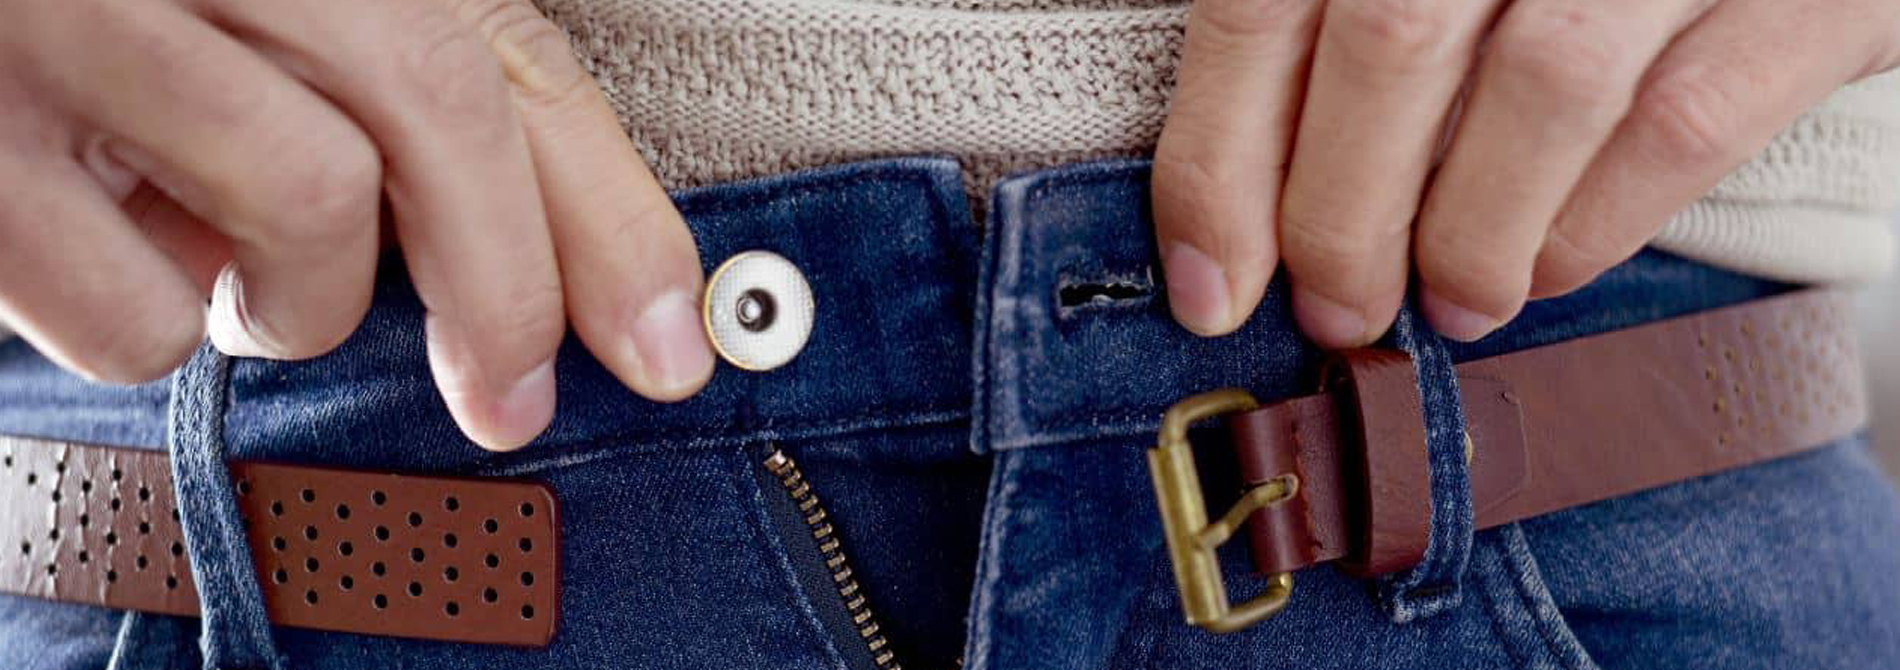 Up close of someone trying to close button on pants